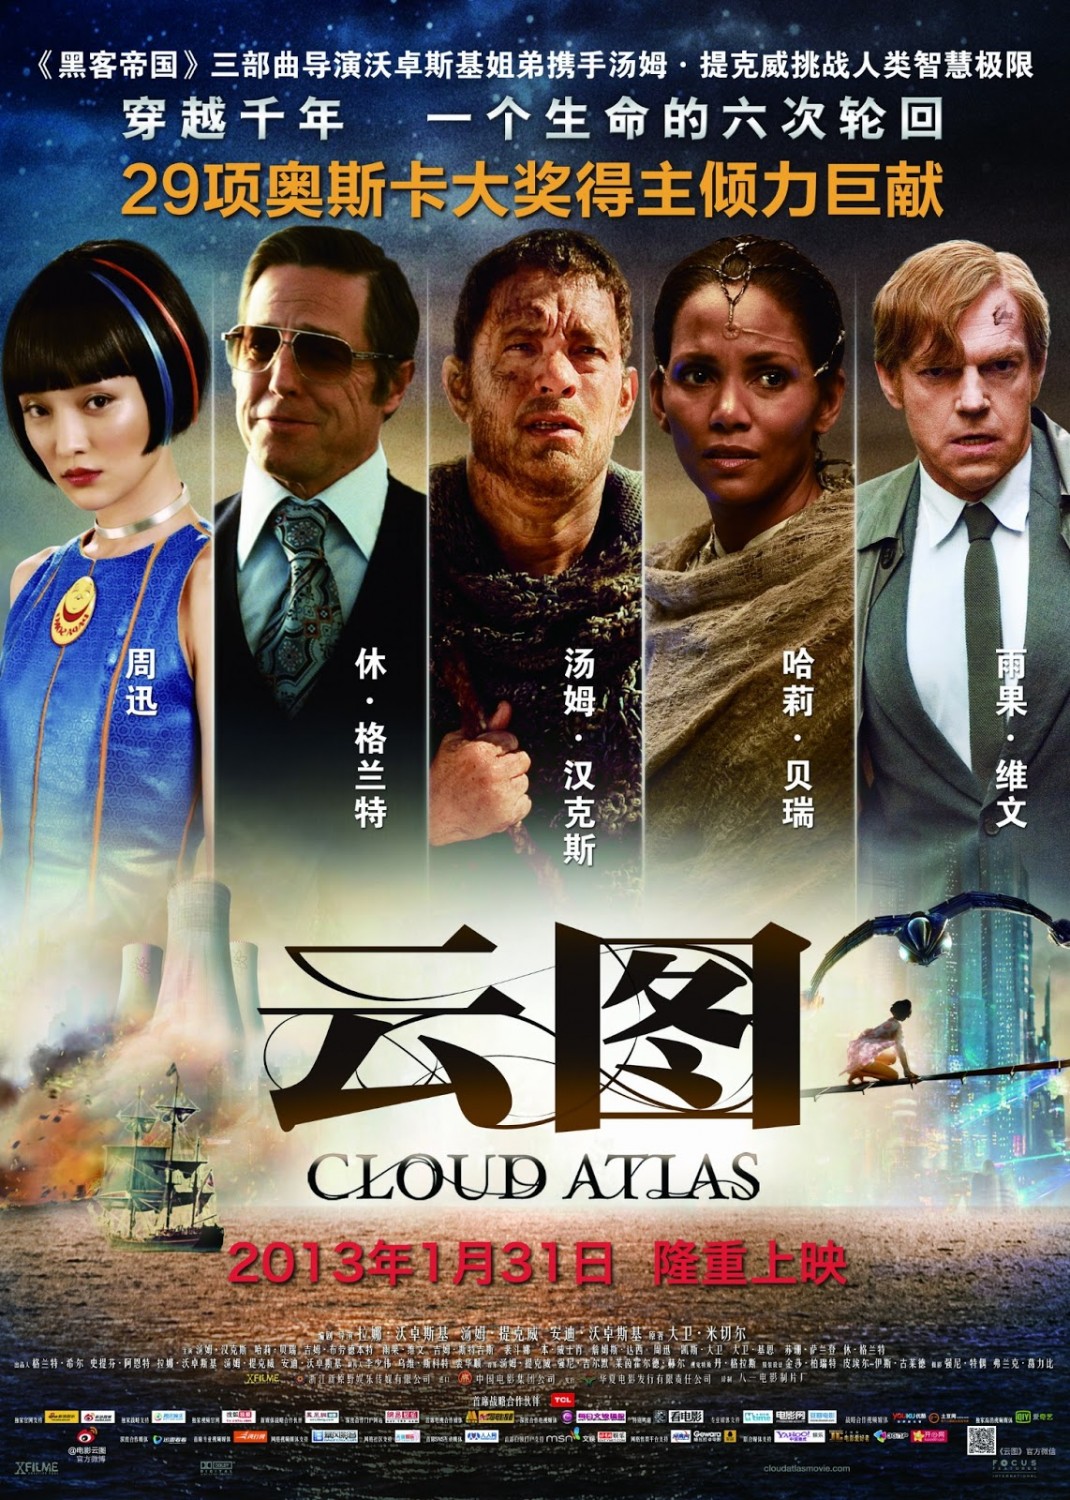 Extra Large Movie Poster Image for Cloud Atlas (#17 of 17)